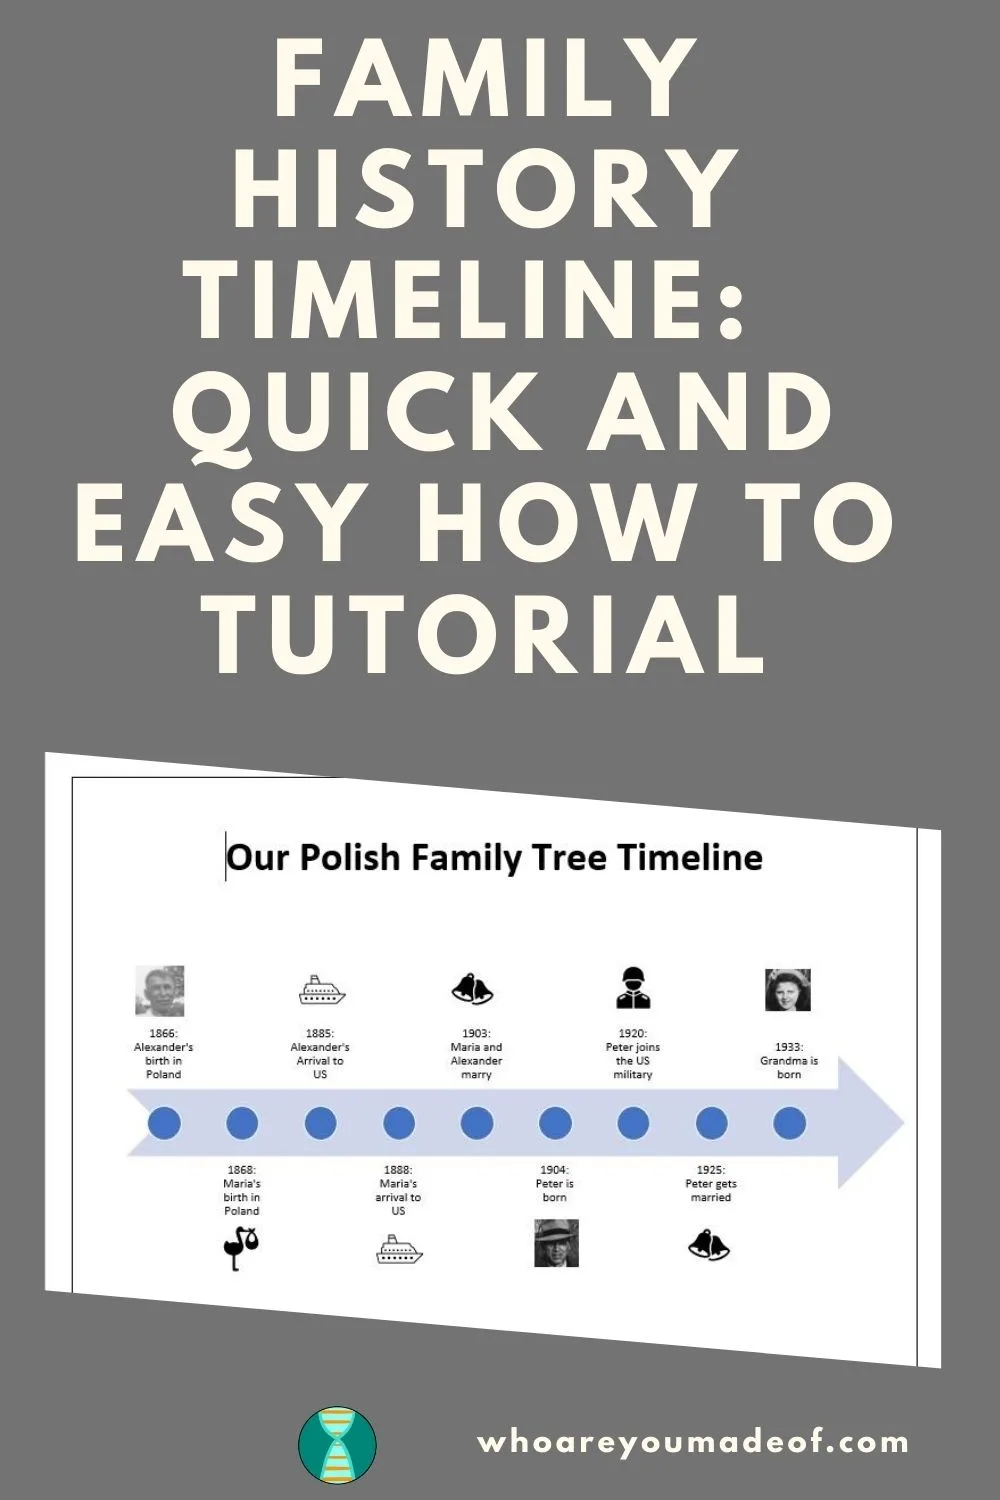 Family History Timeline Quick and Easy How To Tutorial Pinterest Image